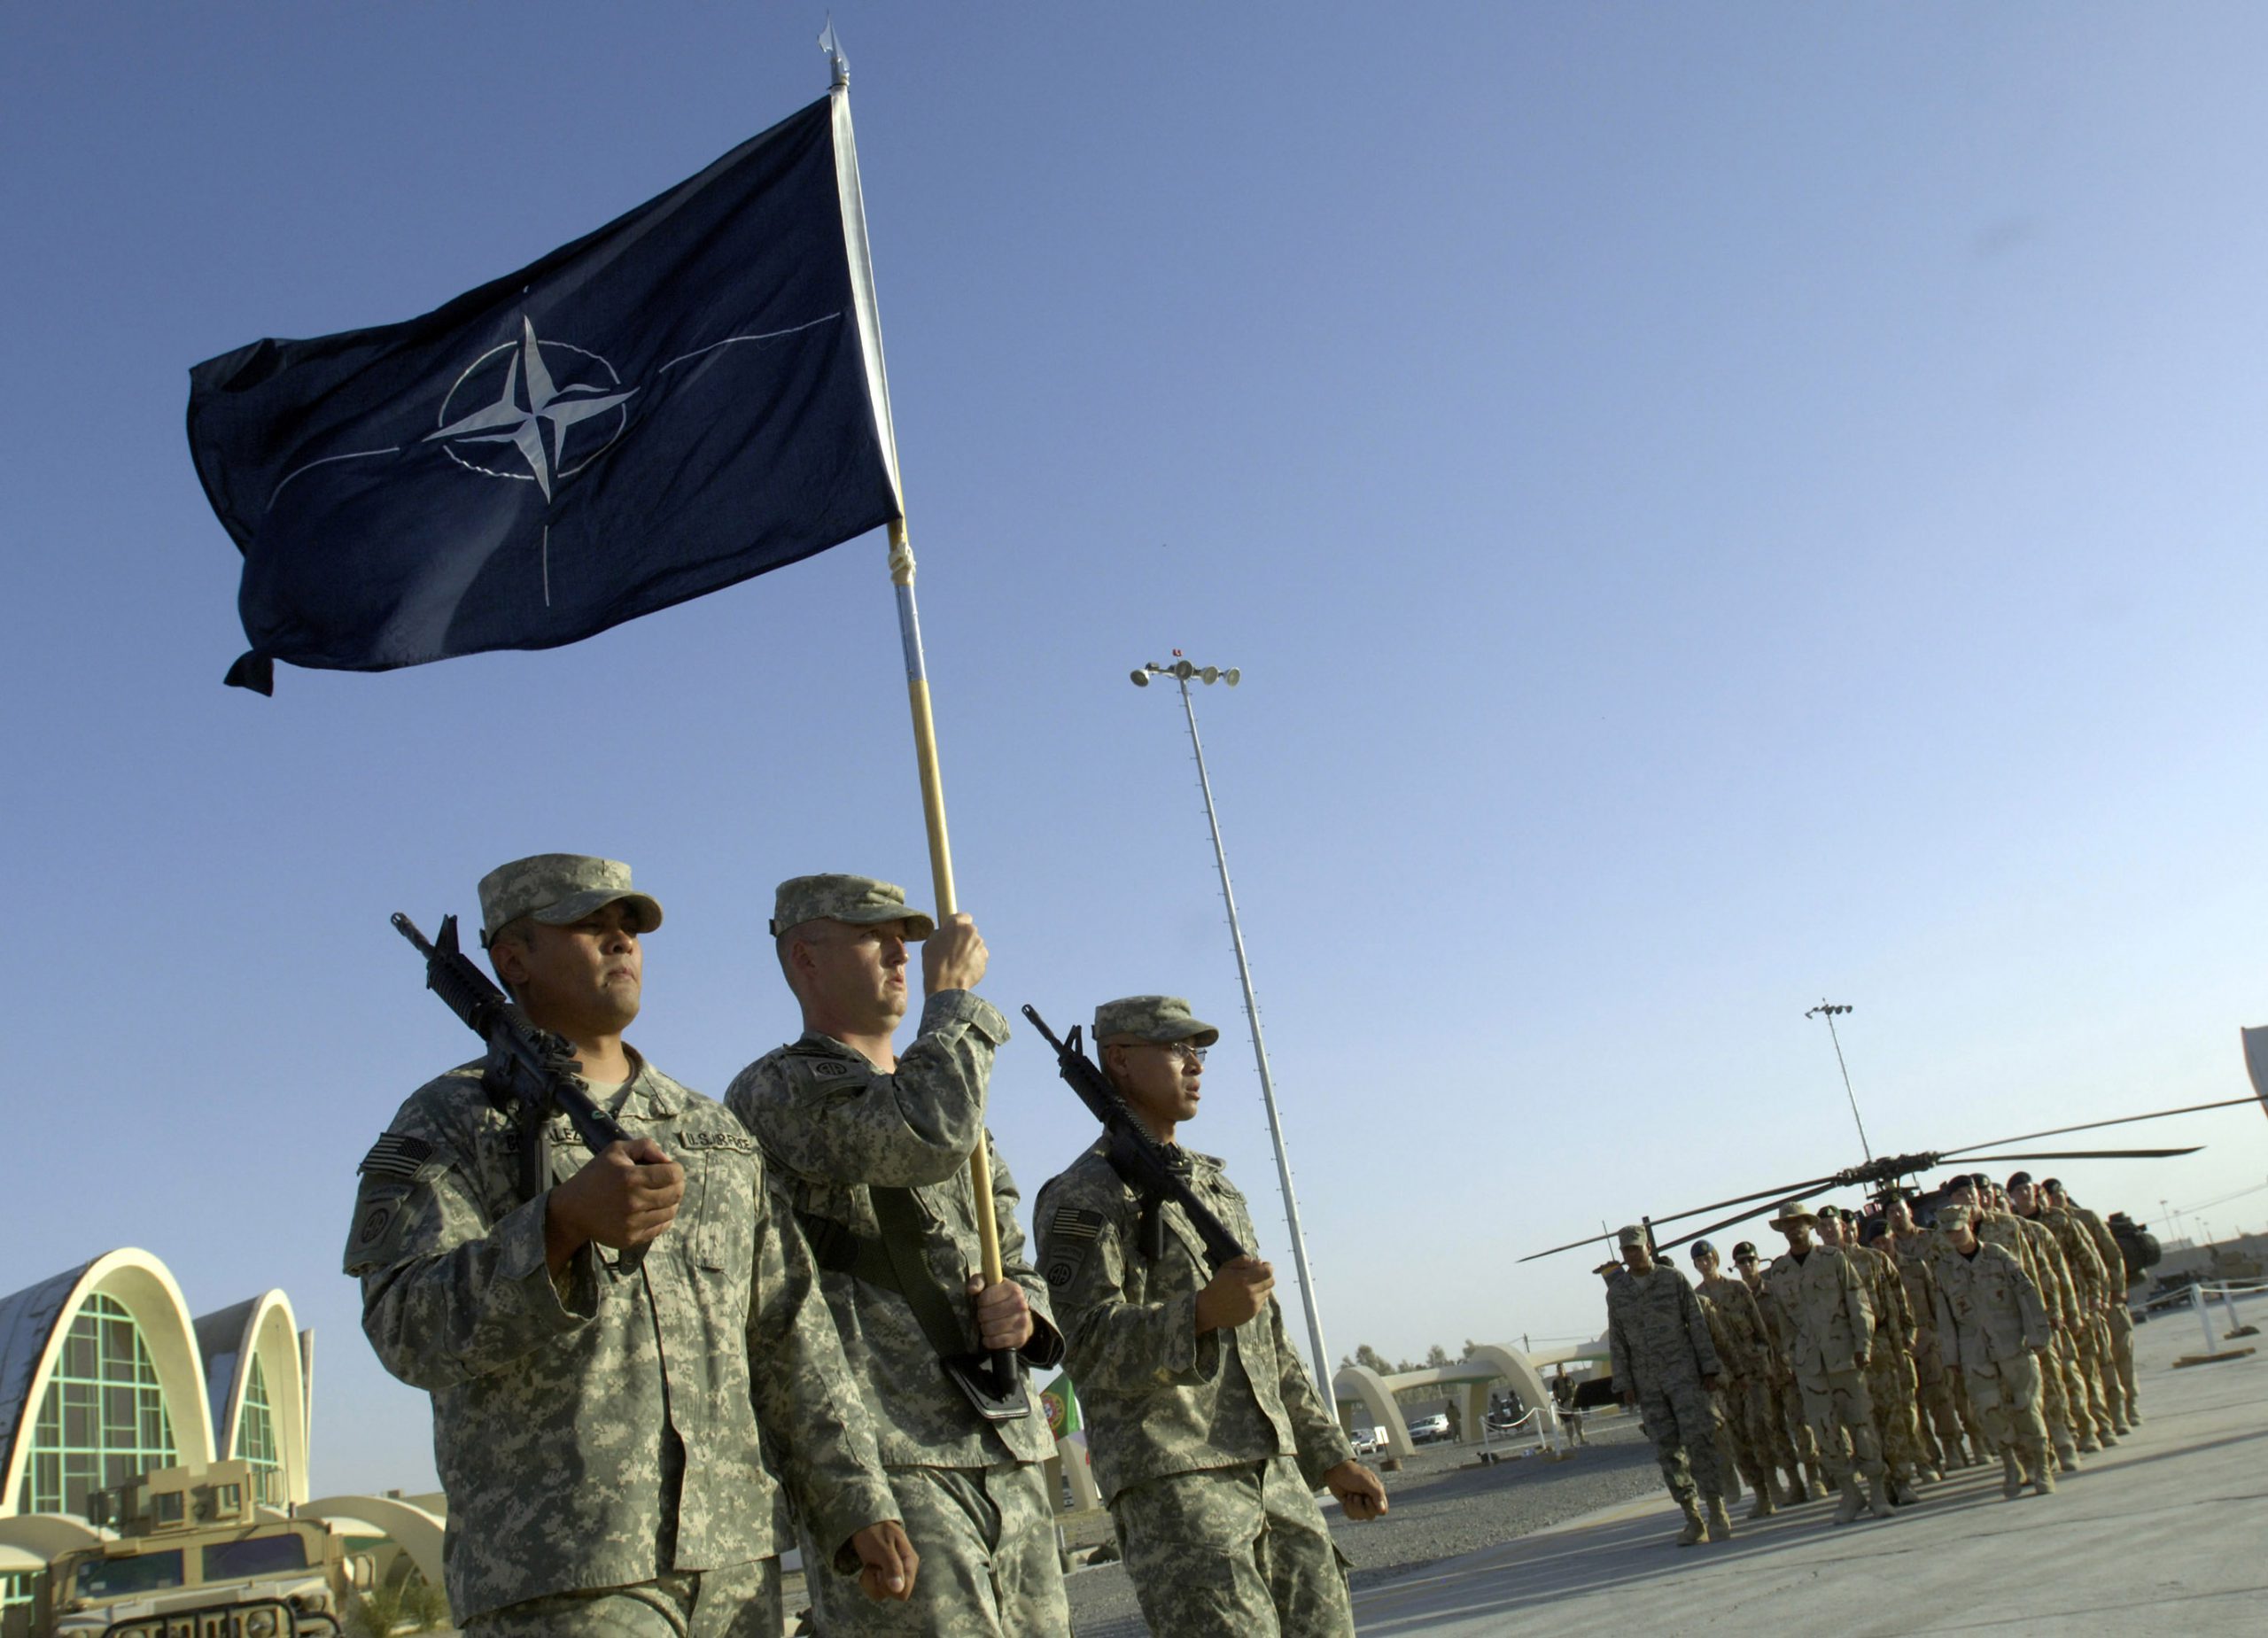 Minsk develops cooperation with NATO and retains military cooperation with Russia